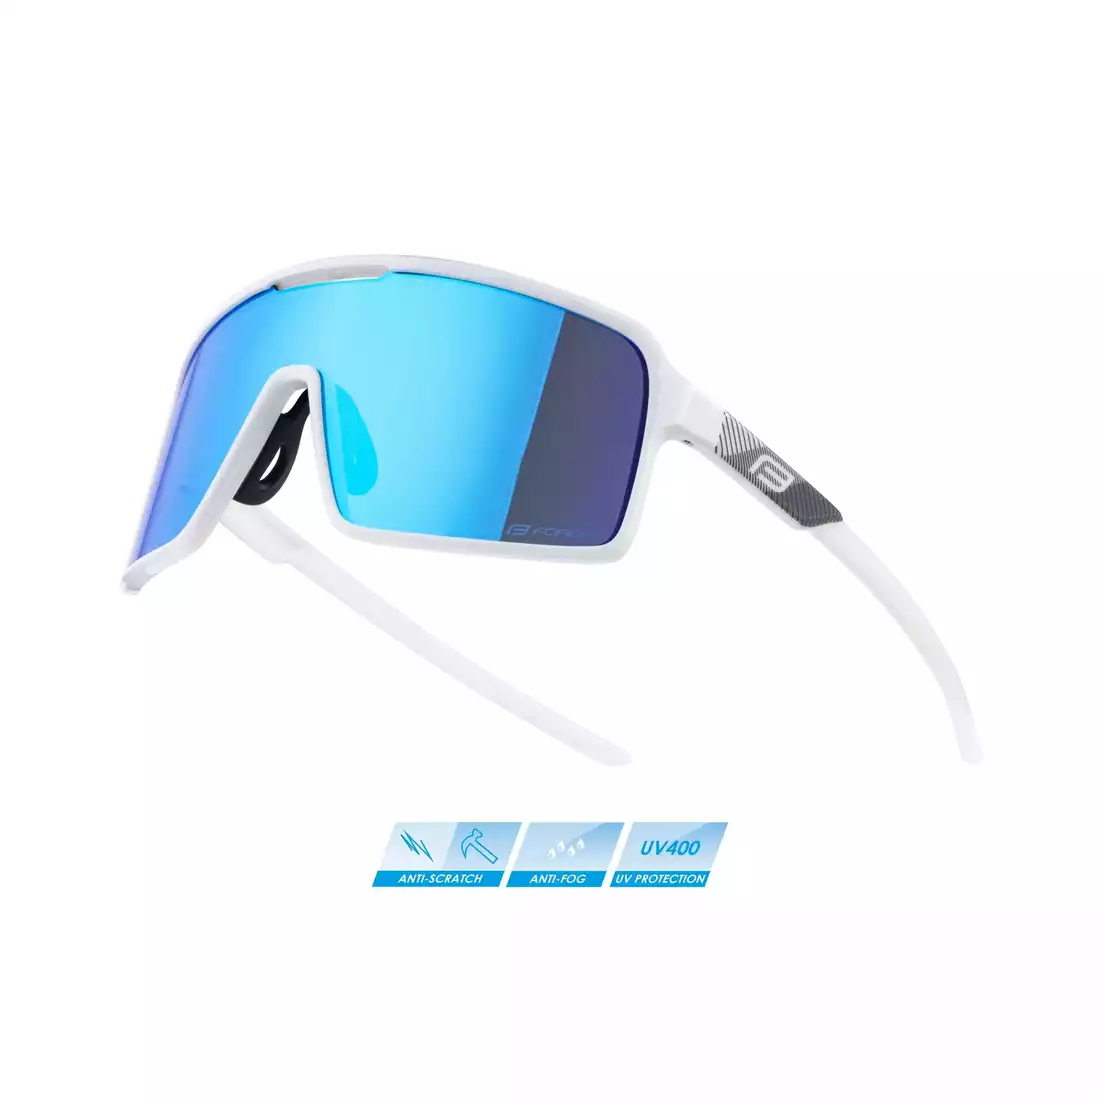 FORCE STATIC bicycle/sports glasses, white